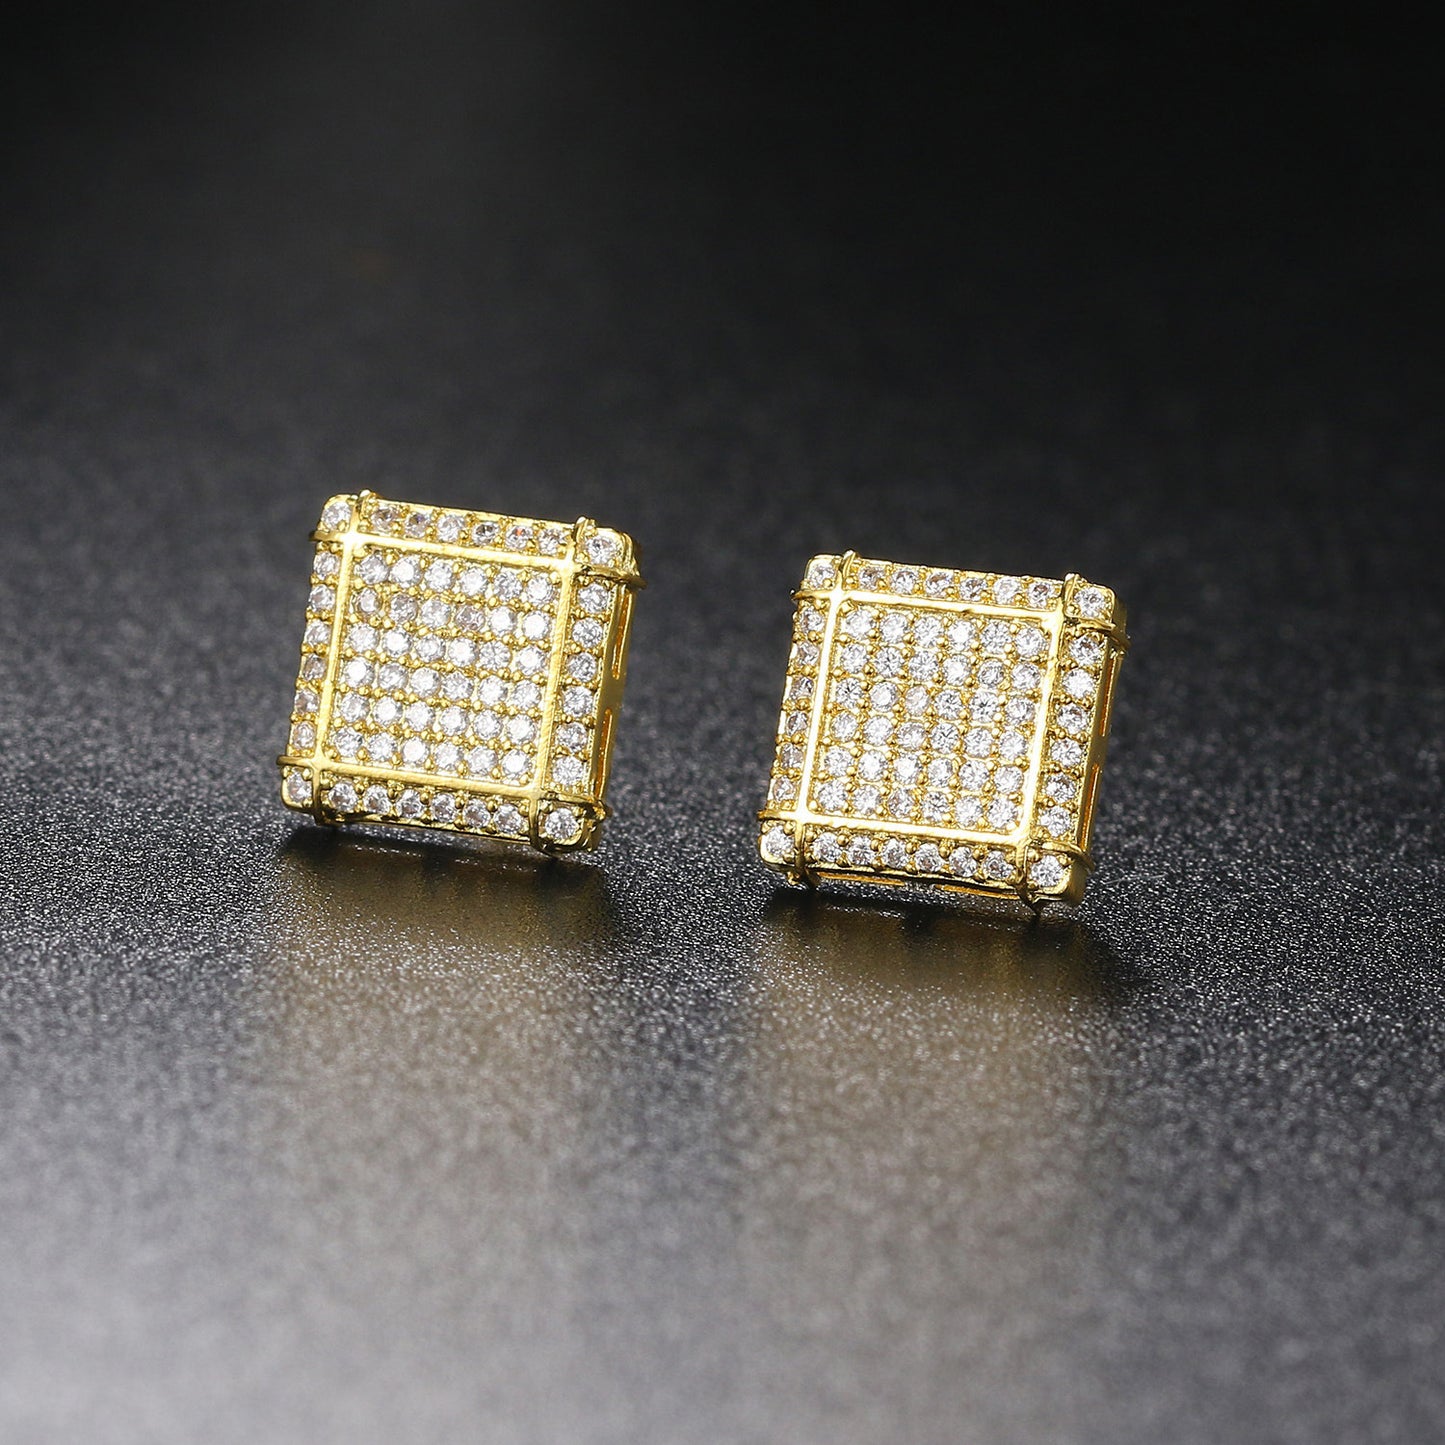 Zircon Hip Hop Earrings Are Popular In Europe And America Men's Square Thread Earrings Are Popular Accessories Hip hop